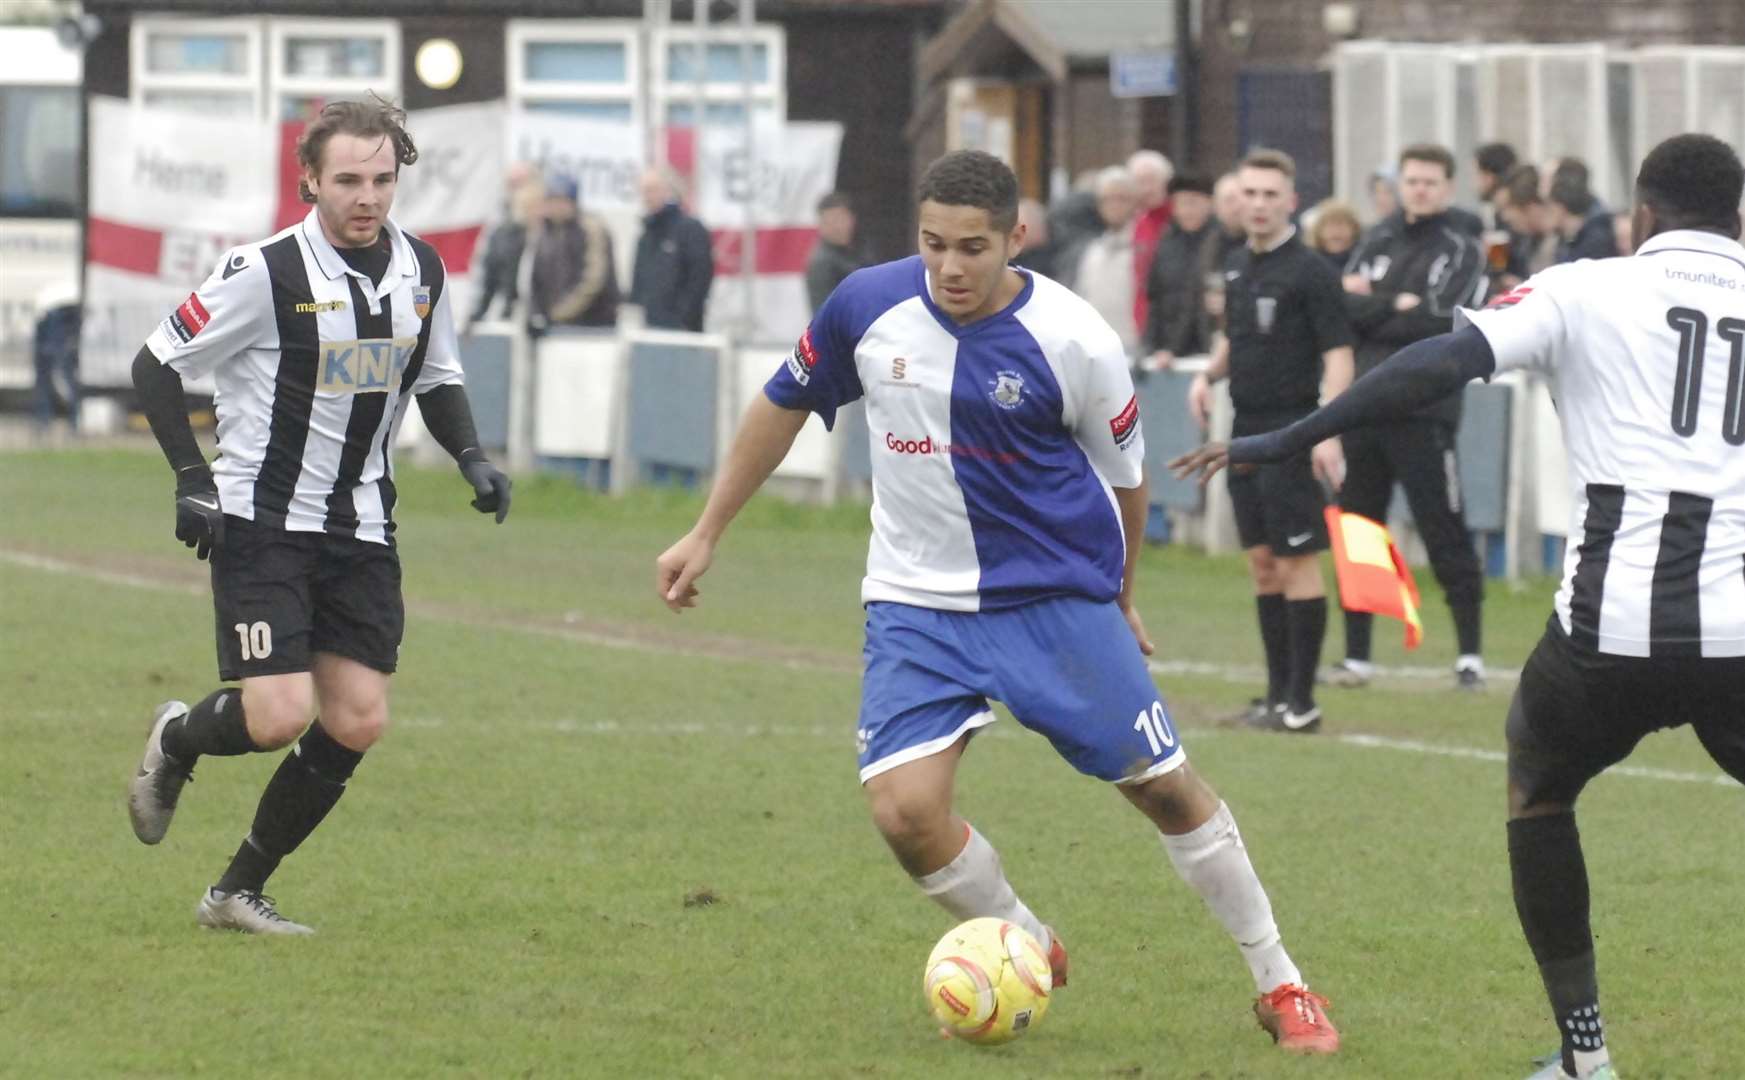 Midfielder Elliot Cutts, pictured in action in 2016, has re-signed for Herne Bay. Picture: Chris Davey